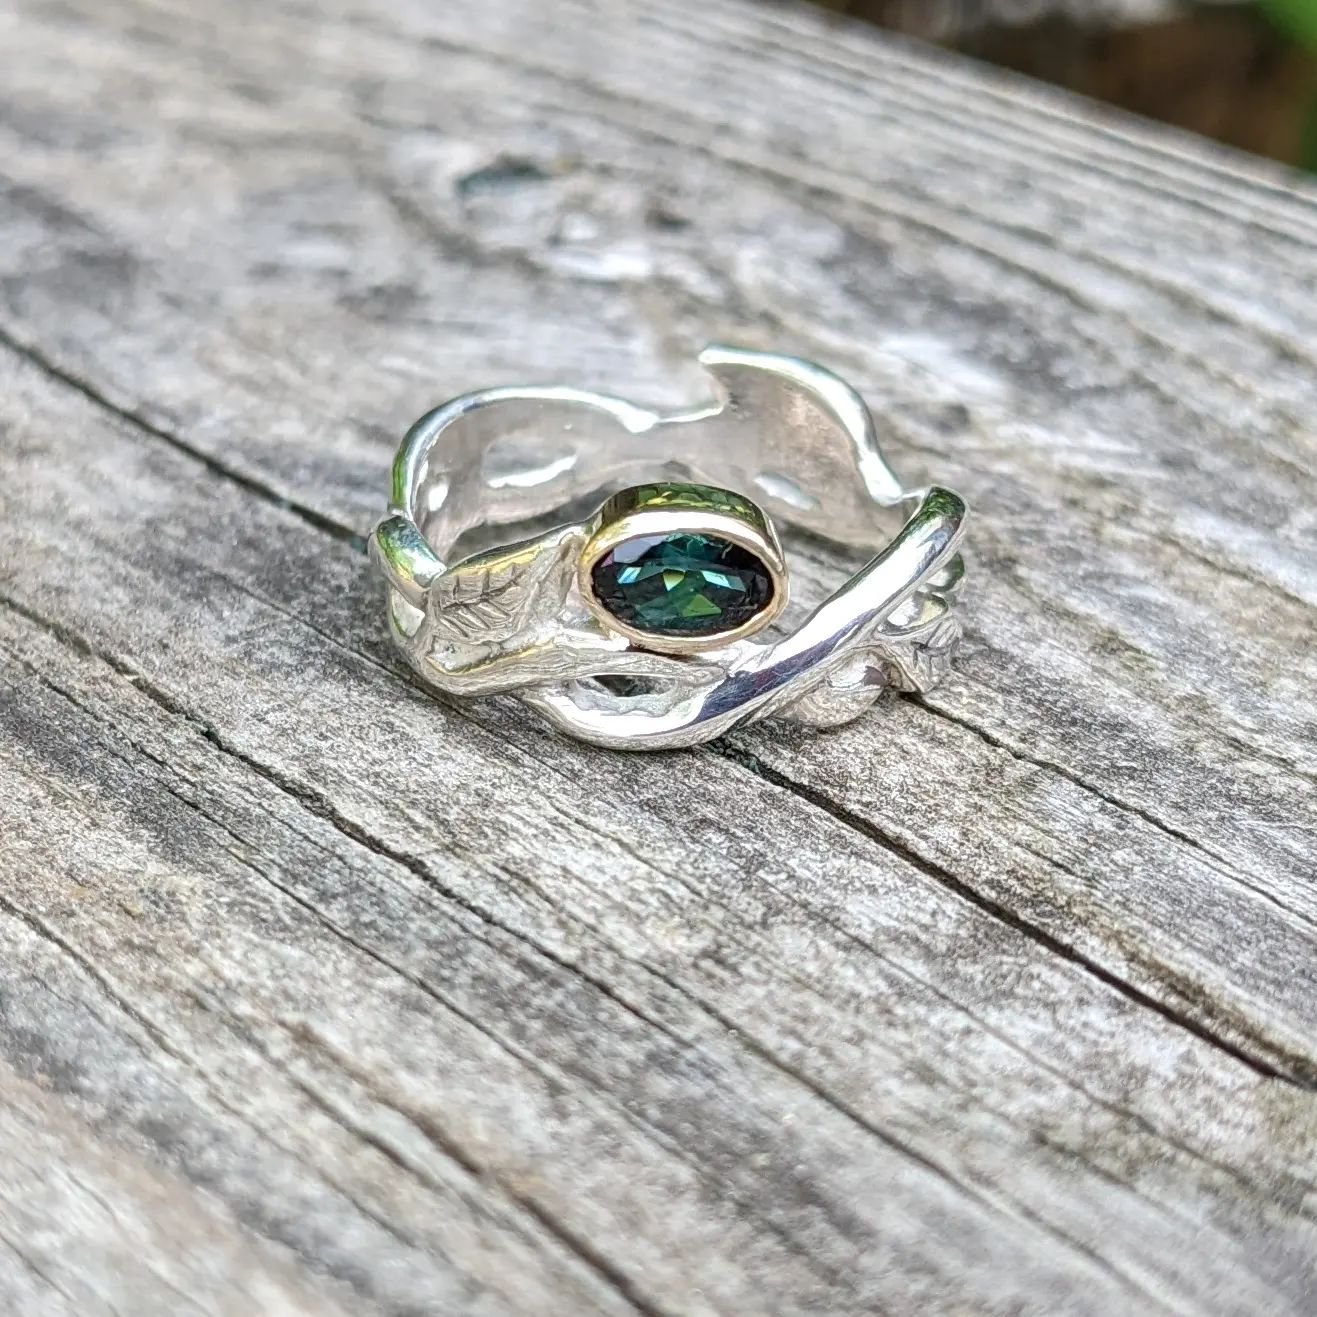 Check out this green tourmaline ring with gold and silver. I call this my secret garden ring because the story of the secret garden was one of the books that really kickstarted my love of the outdoors when I was young. 
It's a beautifully written boo